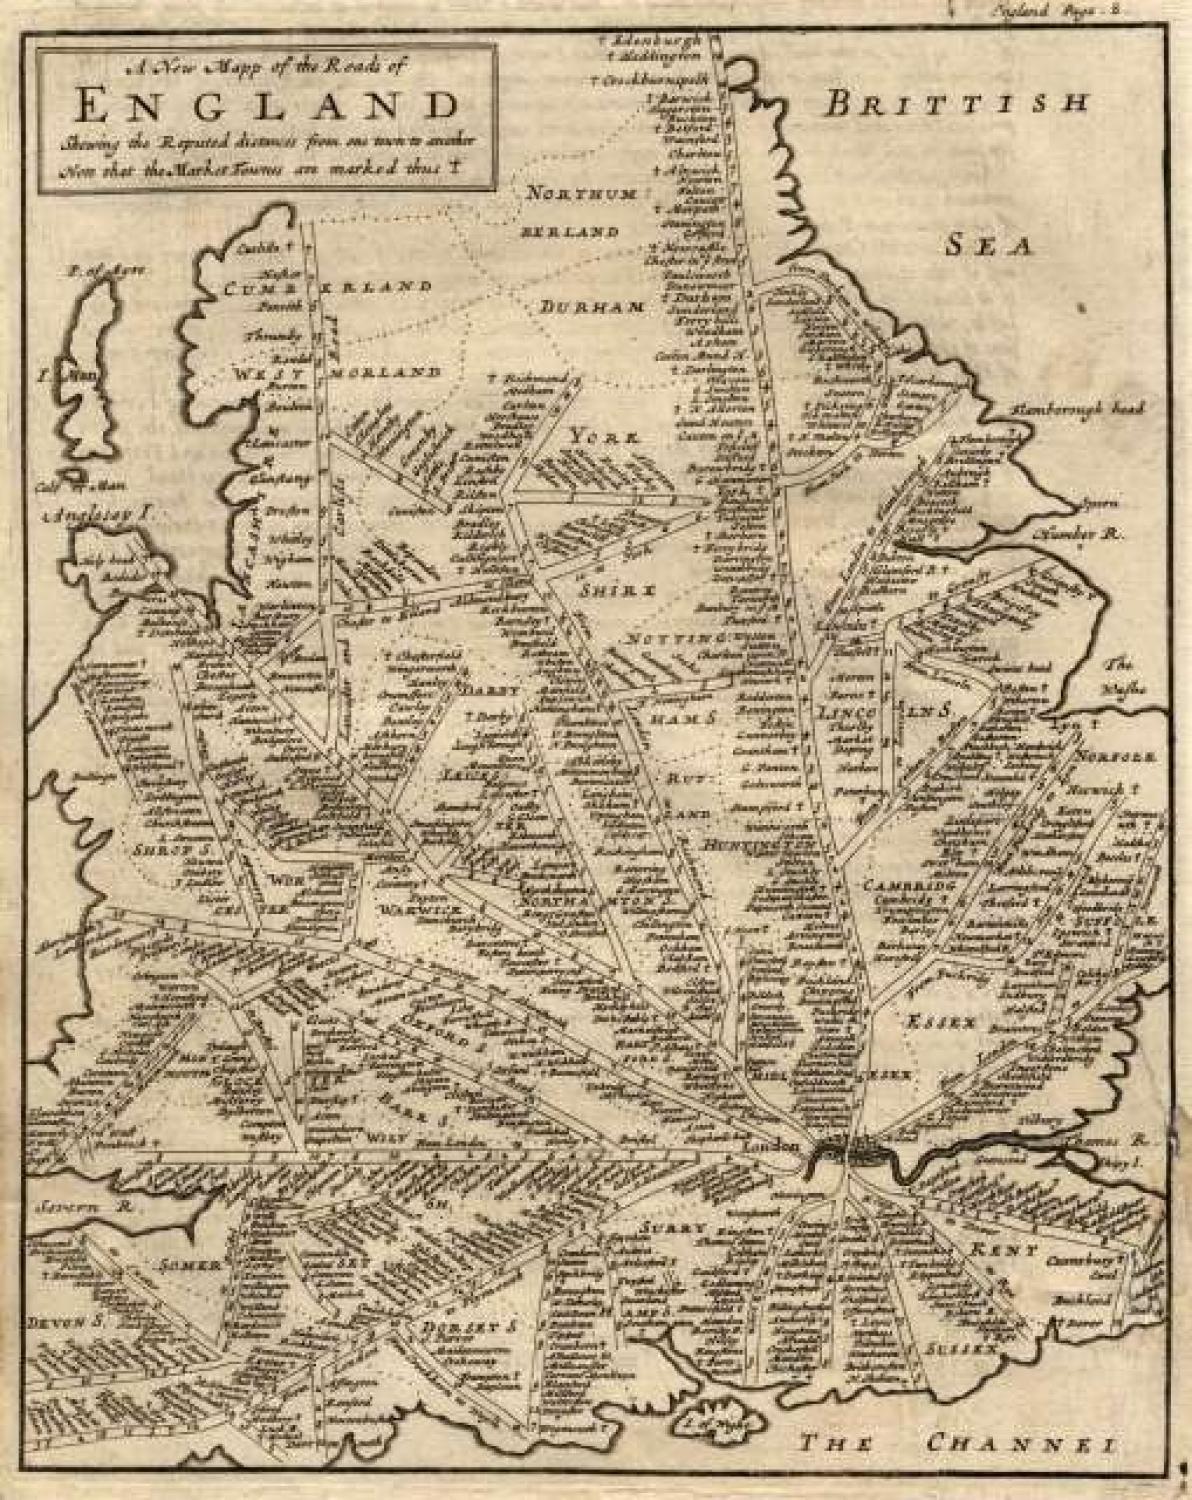 SOLD A New Mapp of the Roads of England shewing the Reputed Distances from One Town to Another